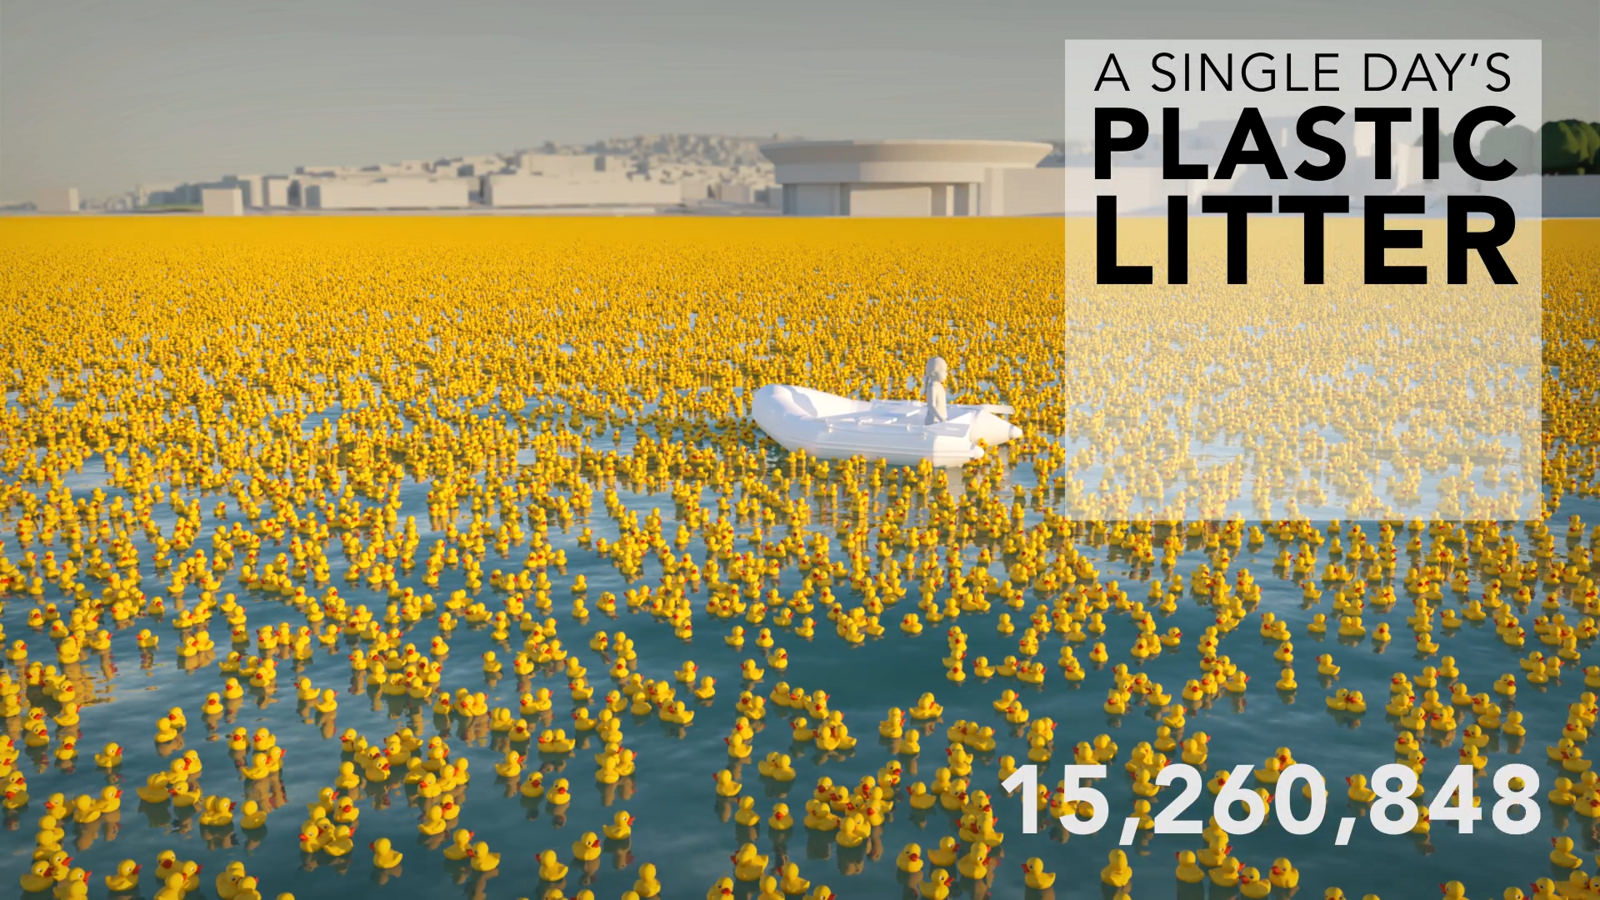 Single-Day-Plastic Litter by RealWorld Visuals